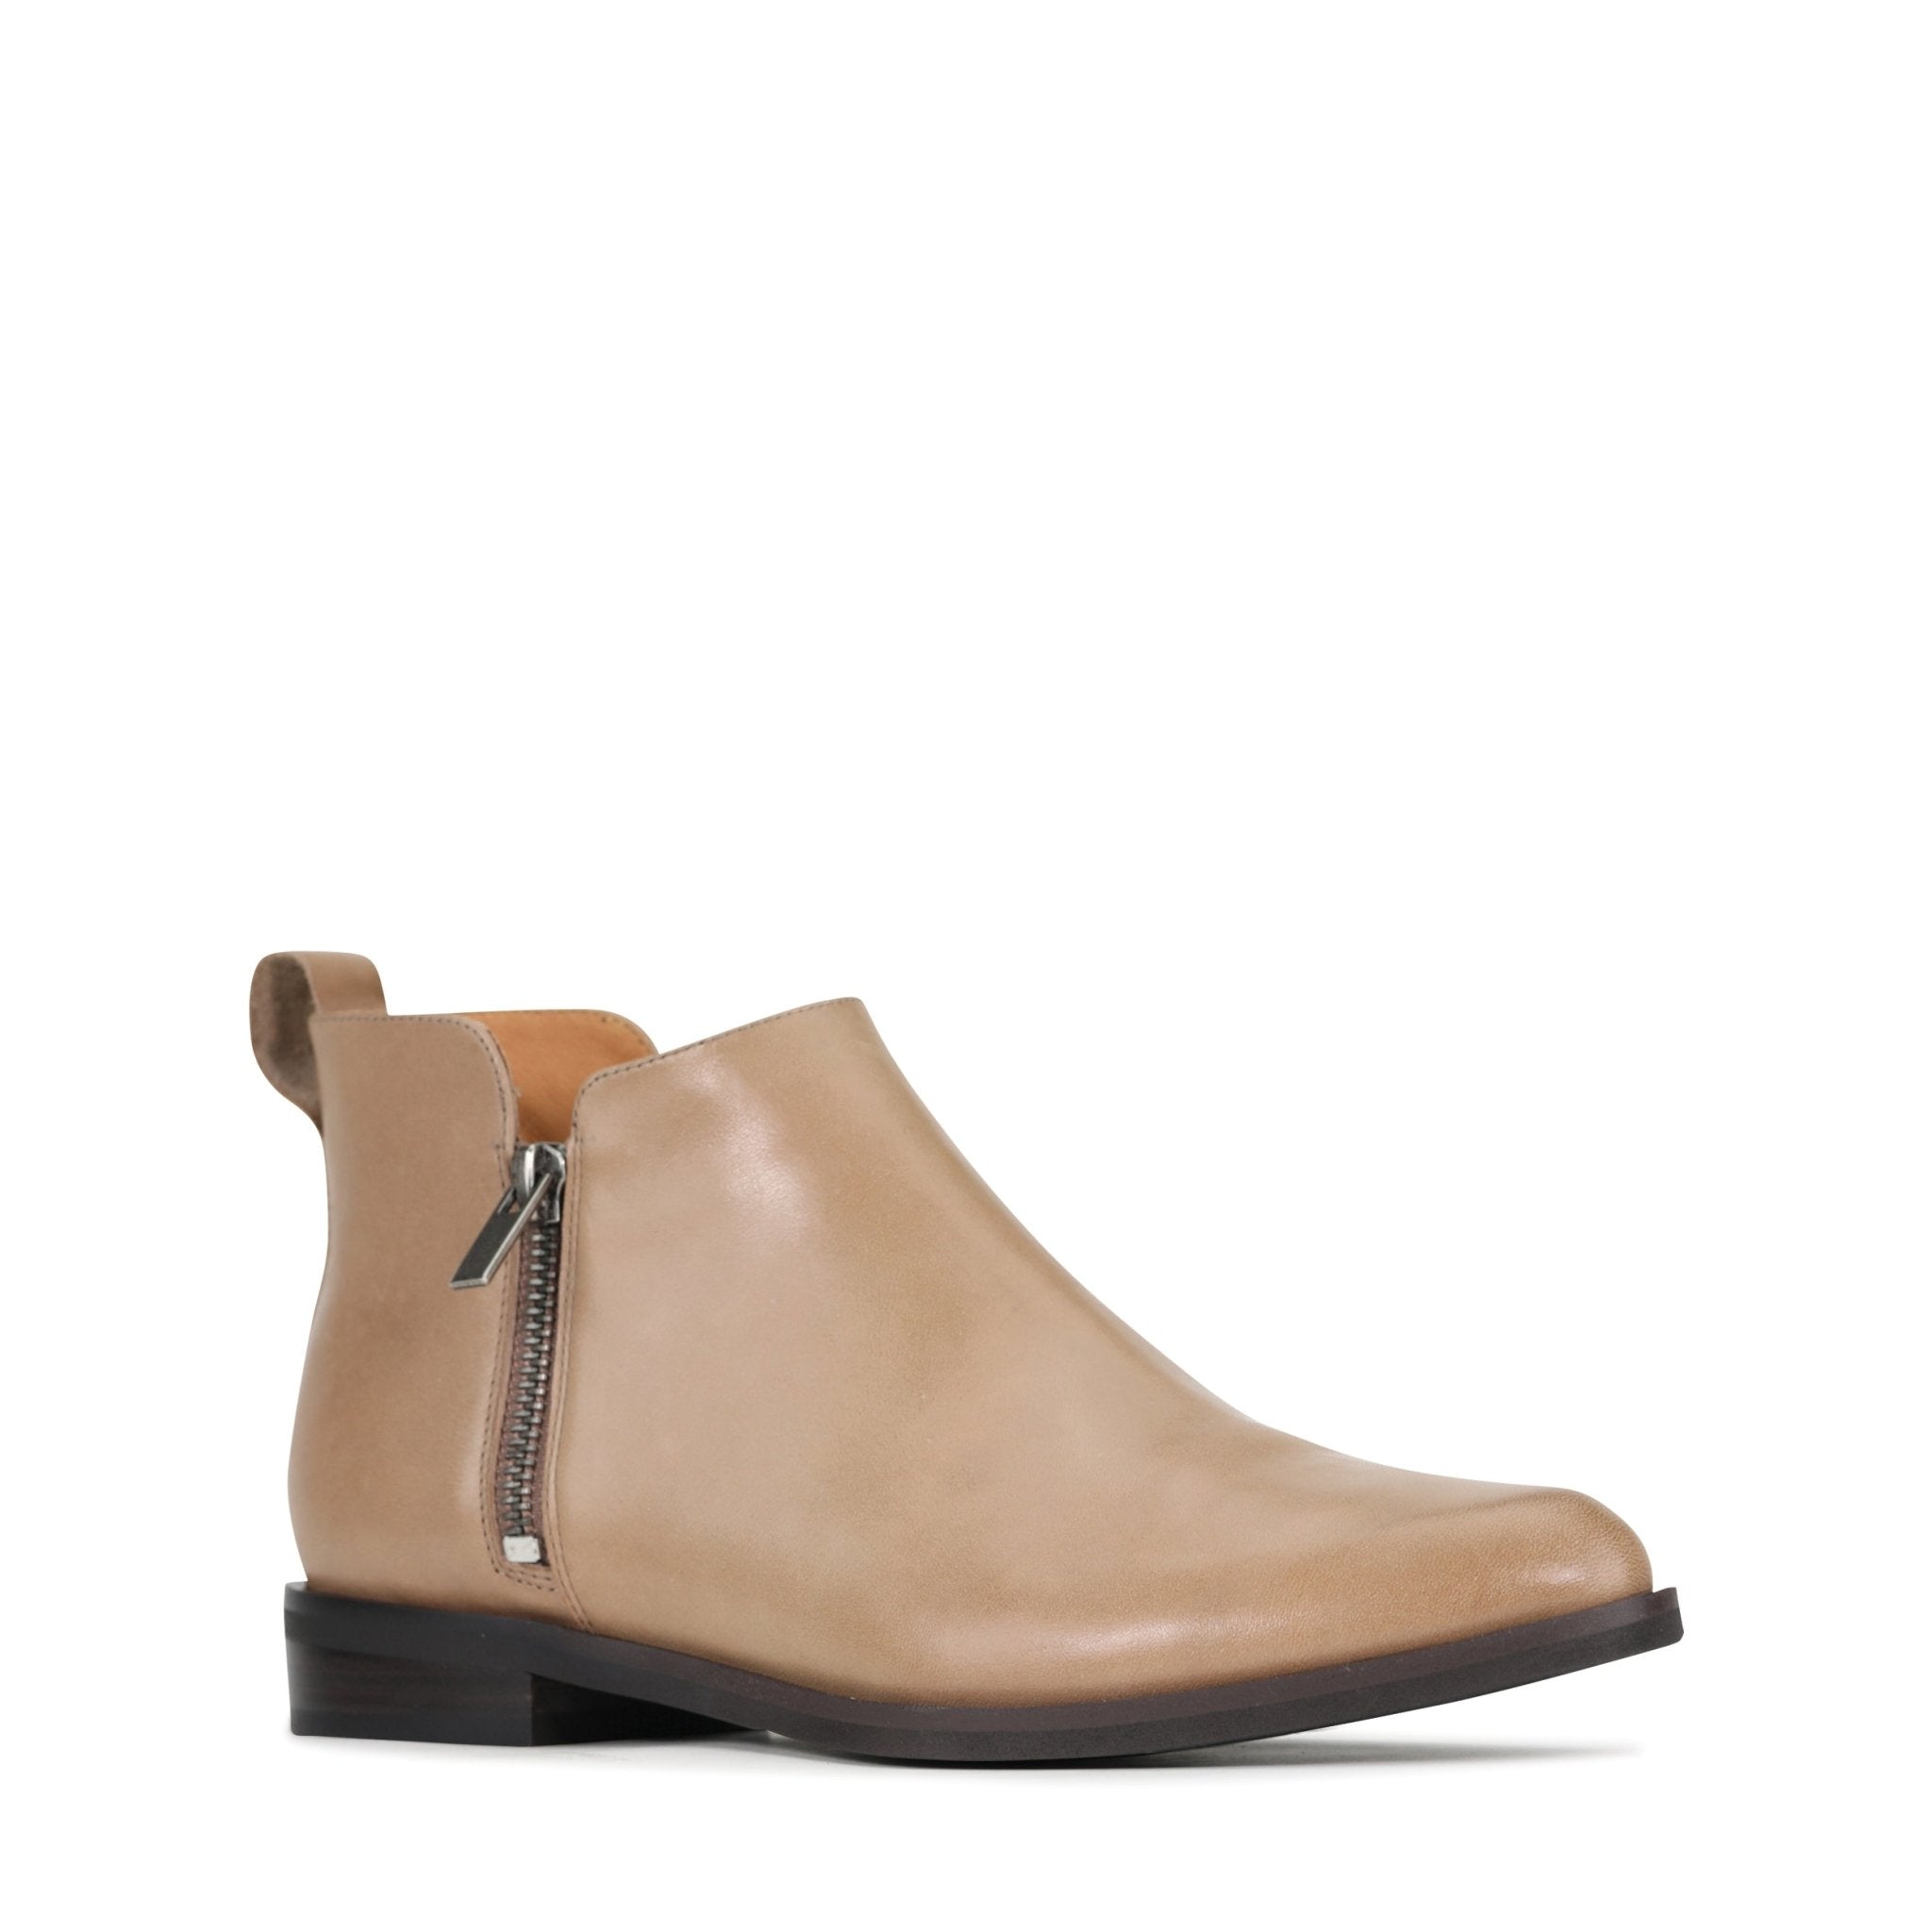 ZARINA - EOS Footwear - Ankle Boots #color_Taupe